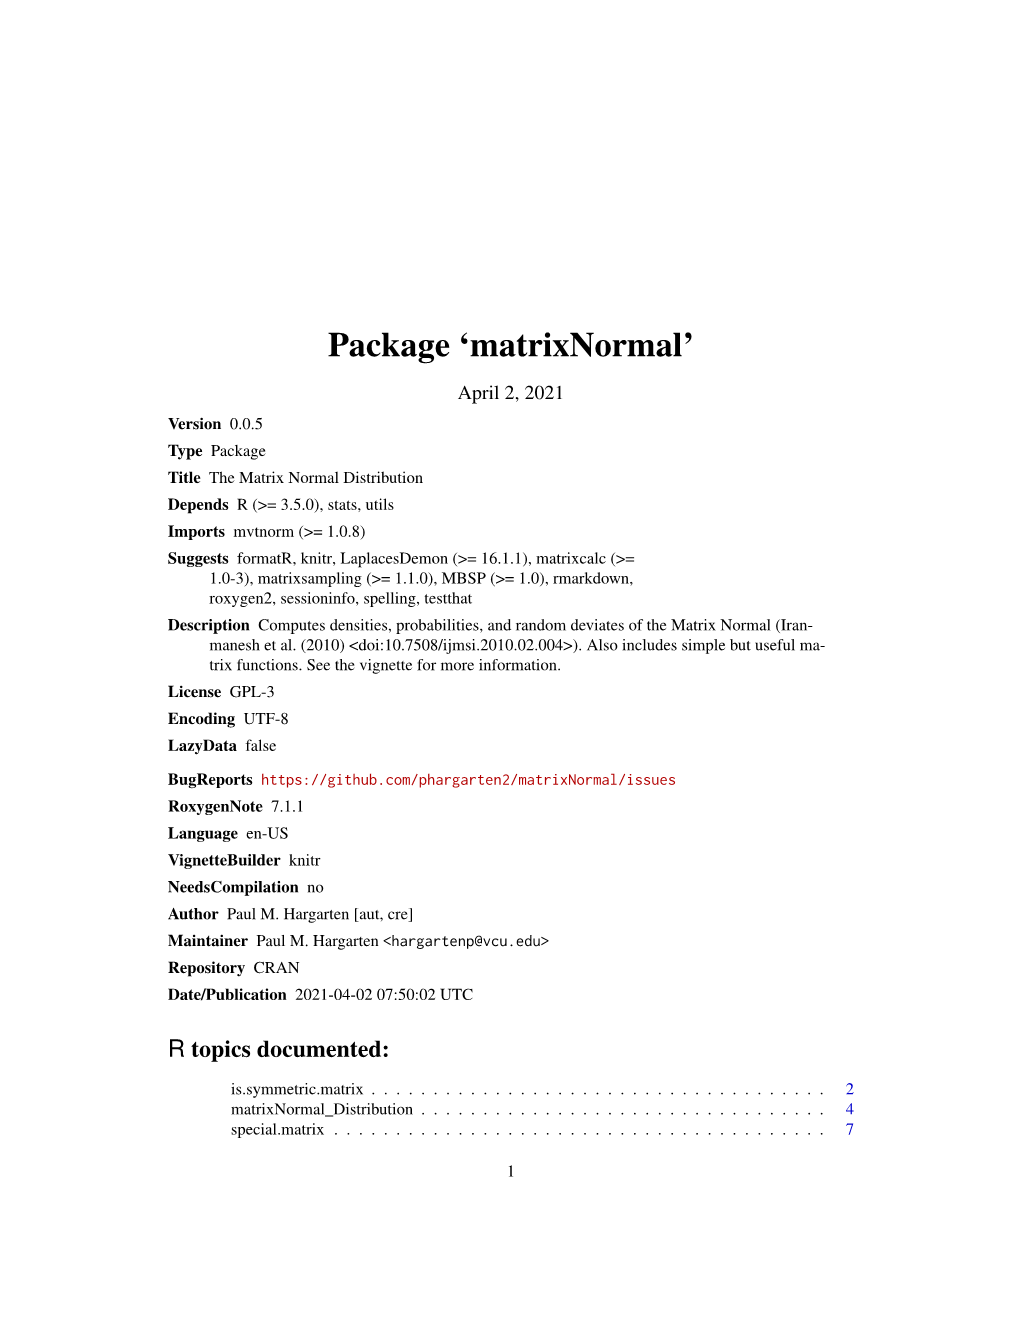 Package 'Matrixnormal'